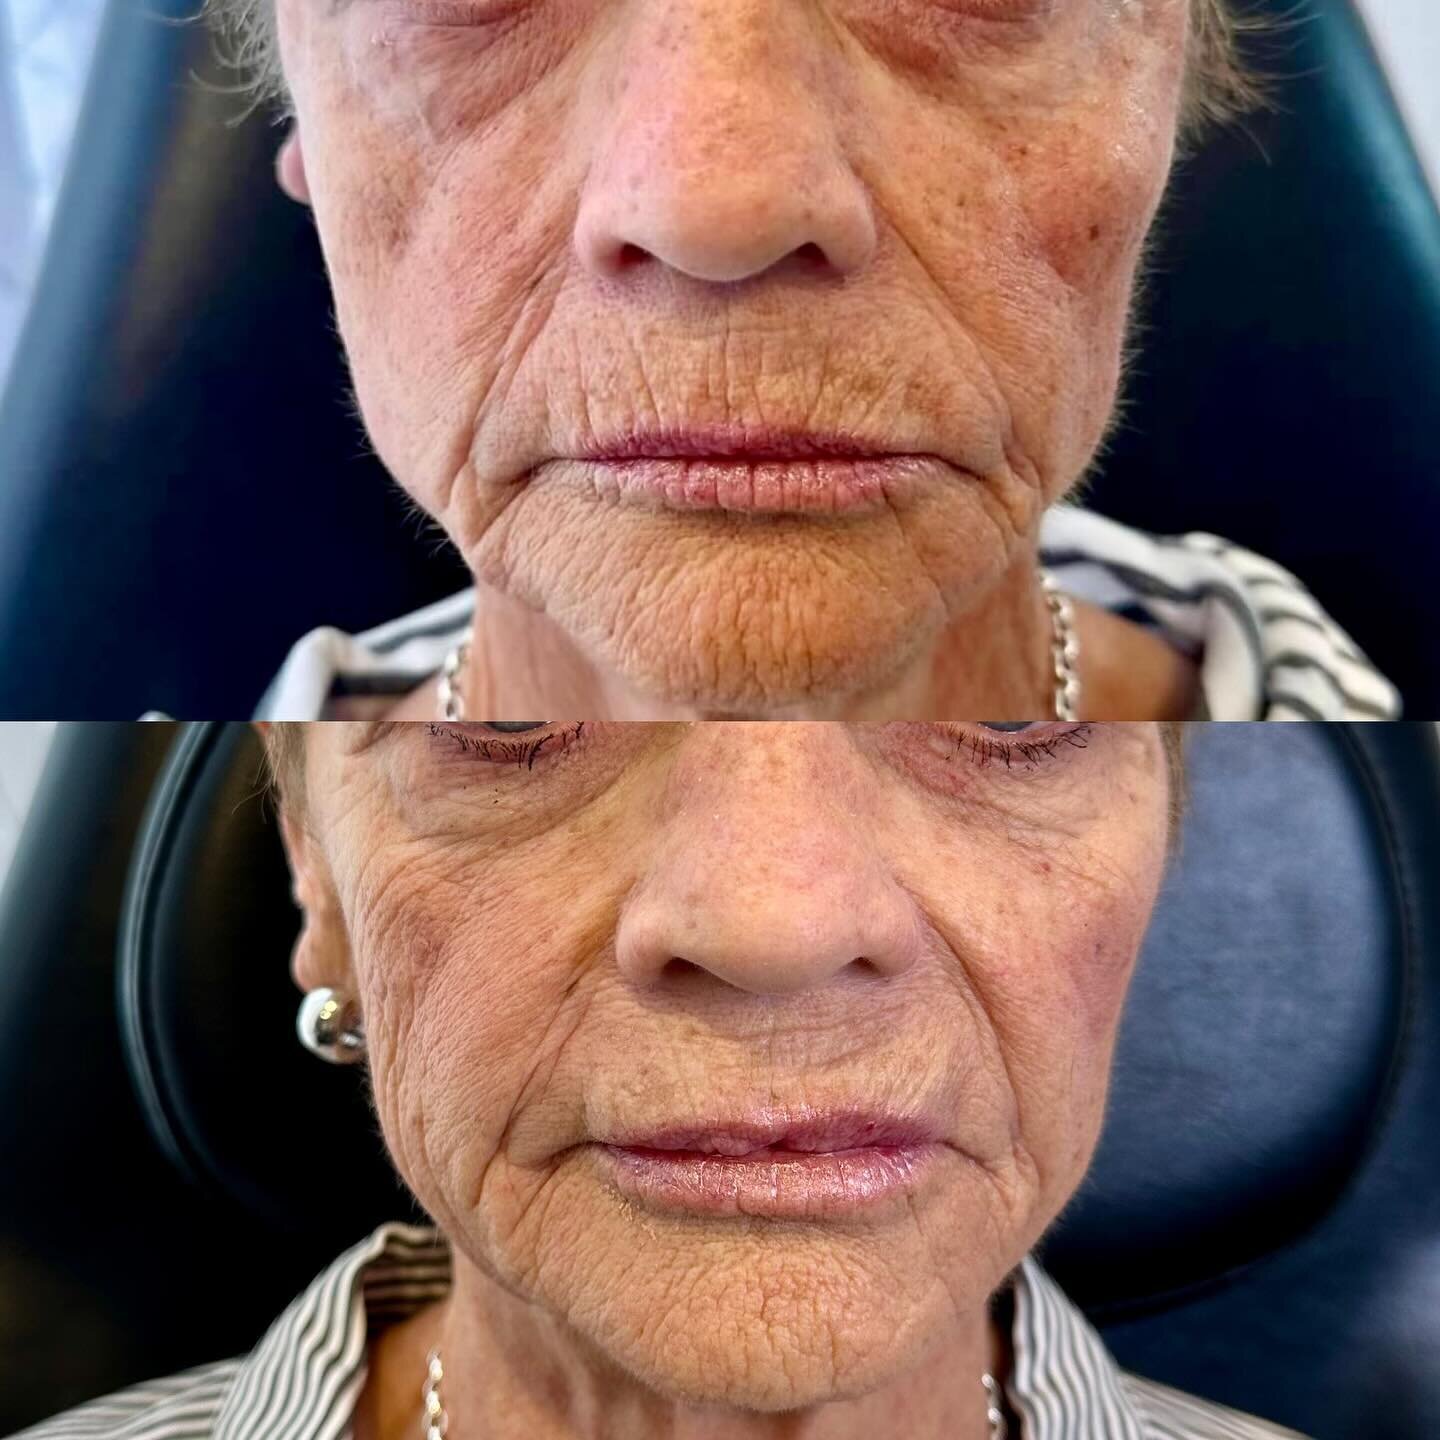 I love what Sculptra can accomplish!
This patient presented with significant volume depletion and after 3 treatments over 3 months with Sculptra she has some noticeable improvement. 

Lips treated with RHA Redensity with a huge improvement  in the pe